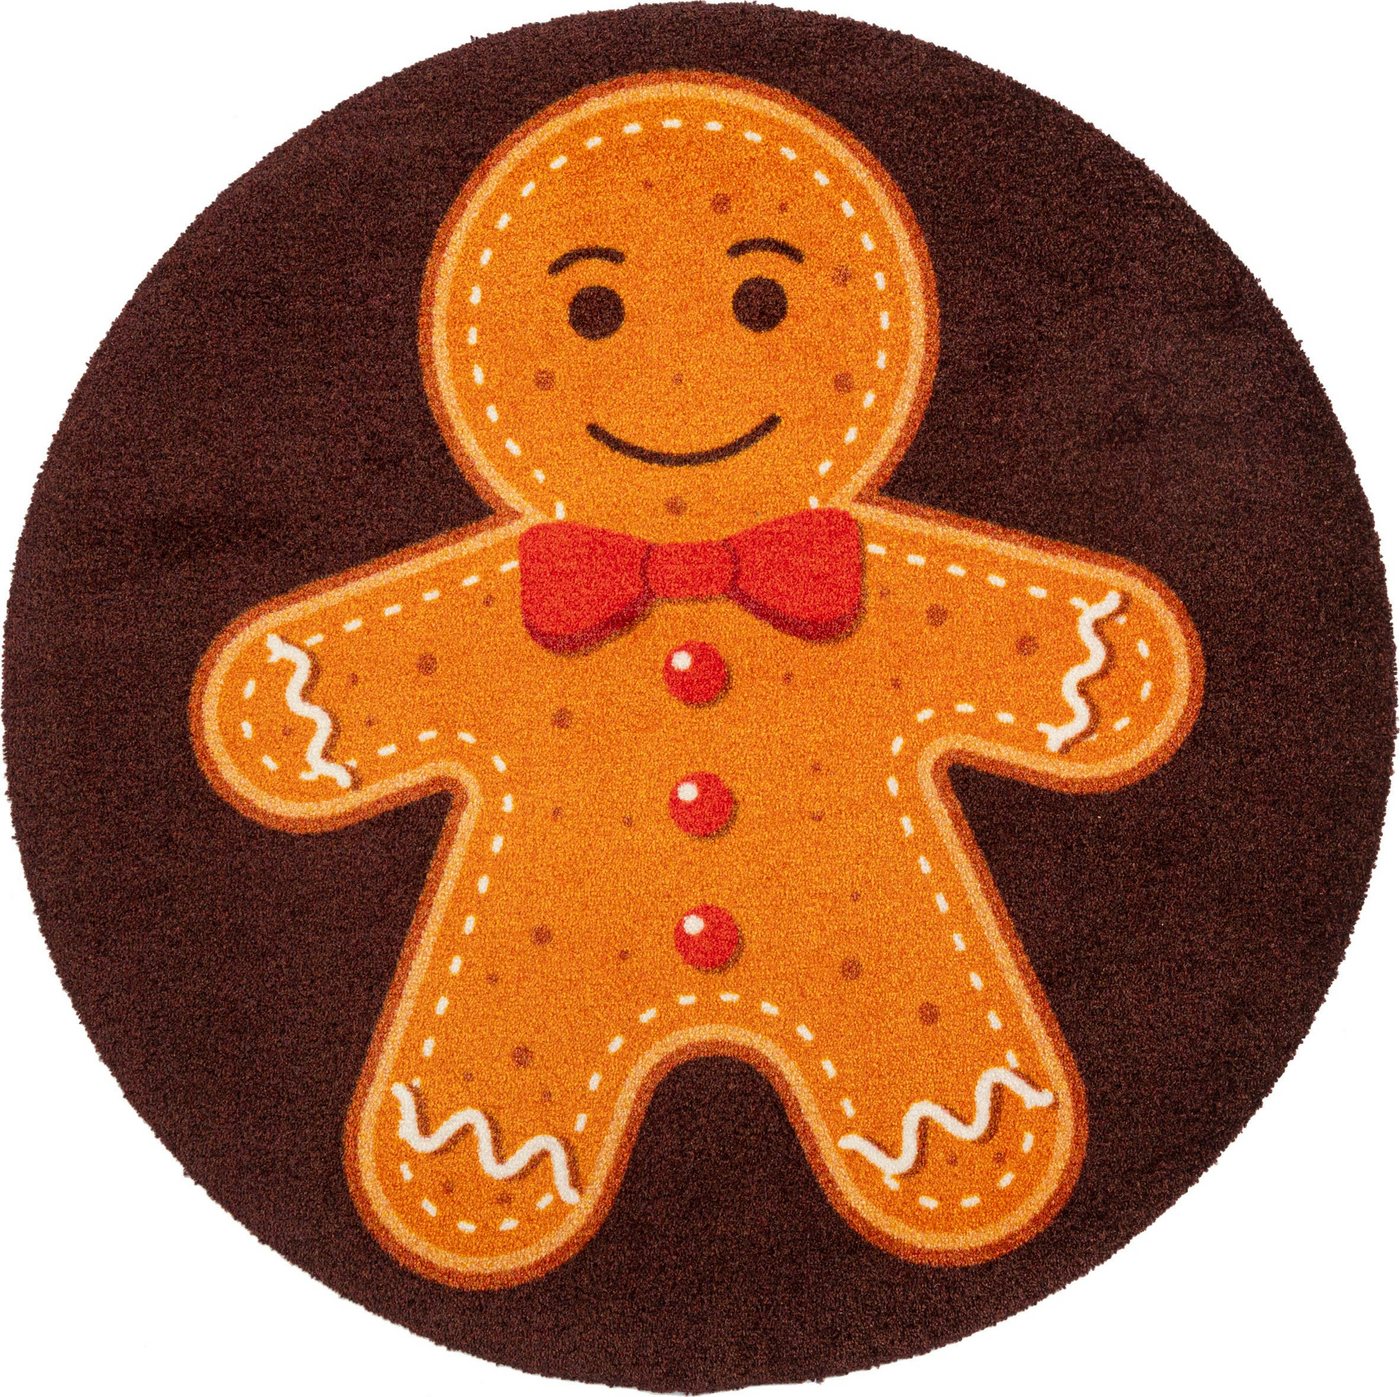 Teppich Gingerbread Man, wash+dry by Kleen-Tex, rechteckig, Höhe: 9 mm von wash+dry by Kleen-Tex